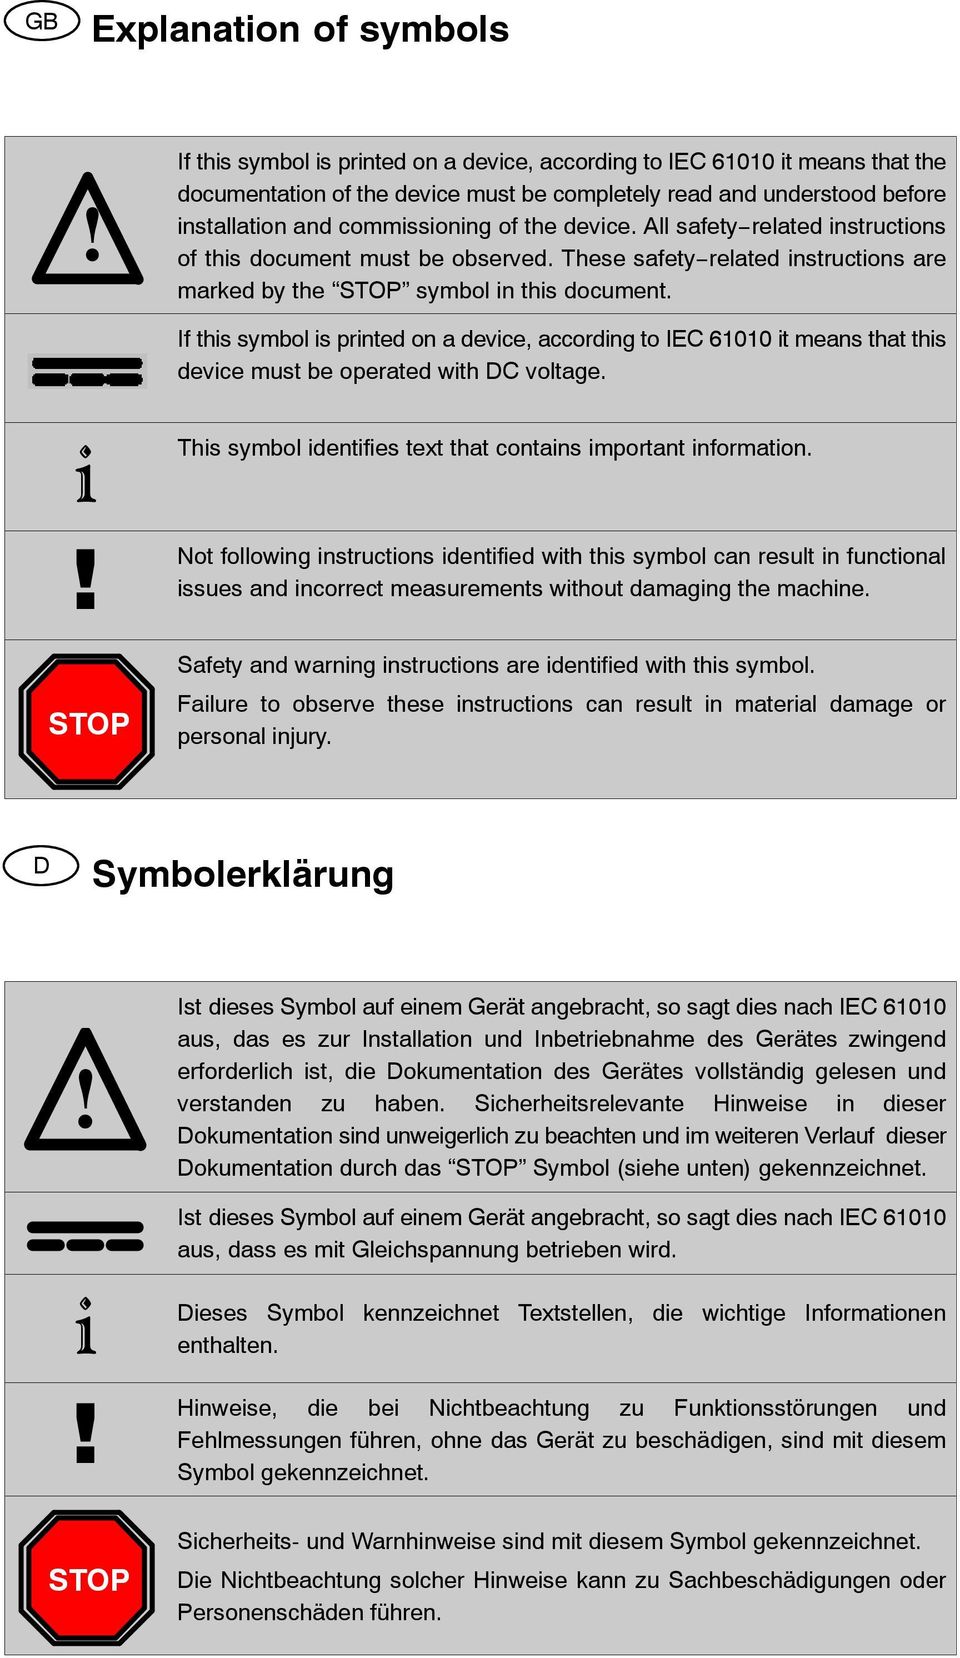 All safety related instructions of this document must be observed. These safety related instructions are marked by the STOP symbol in this document.